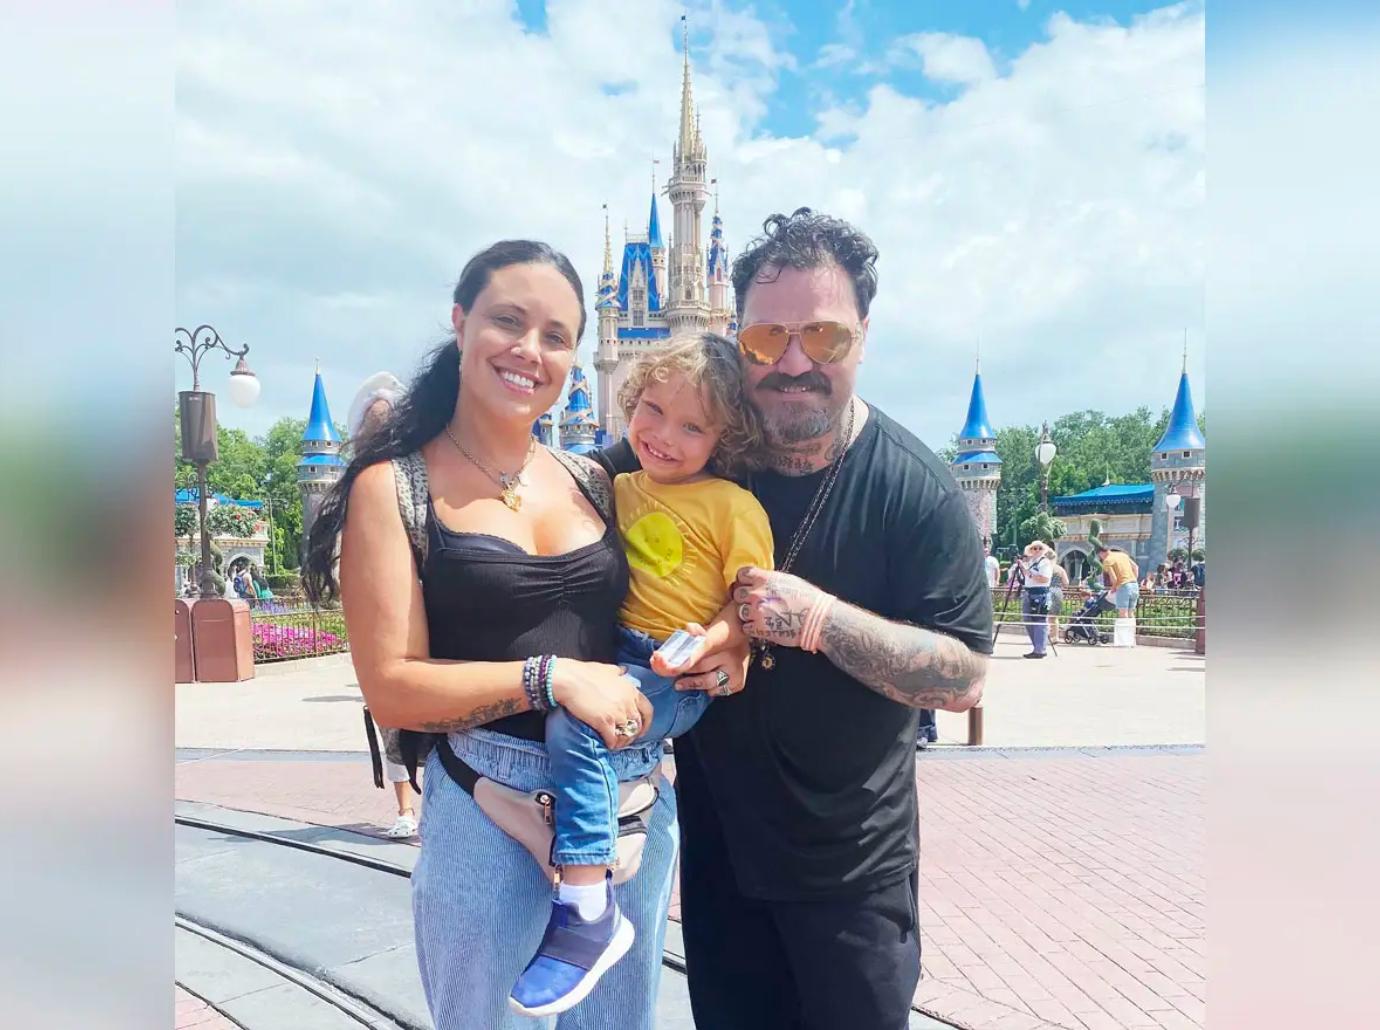 Bam Margera Cut Off From Contact With Son Phoenix After Arrest picture